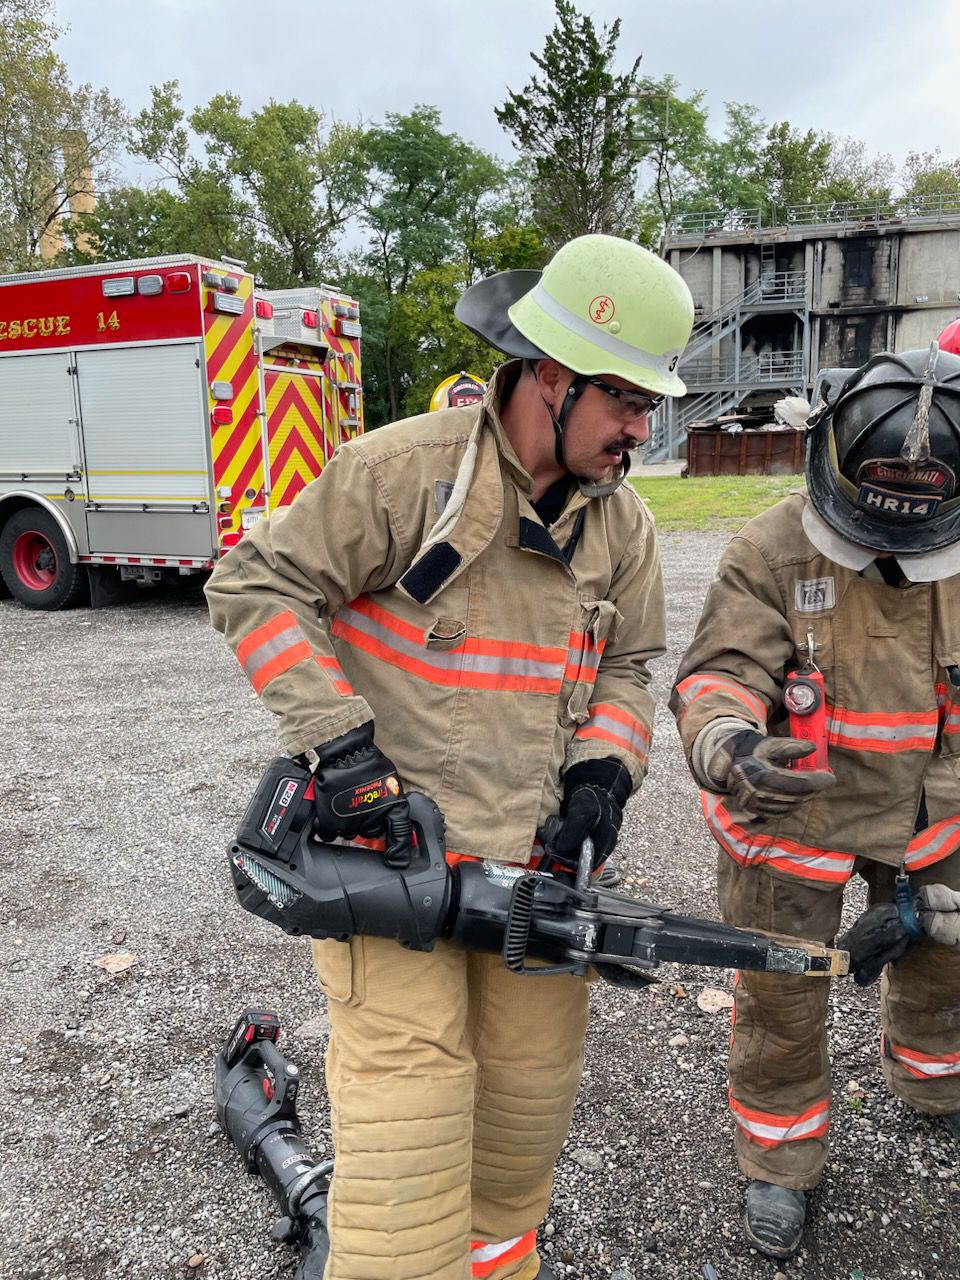 Firefighter Philip Knecht uses a piece of equipment while training with the Cincinnati Fire Department. (Photo courtesy of Cincinnati Fire Department)